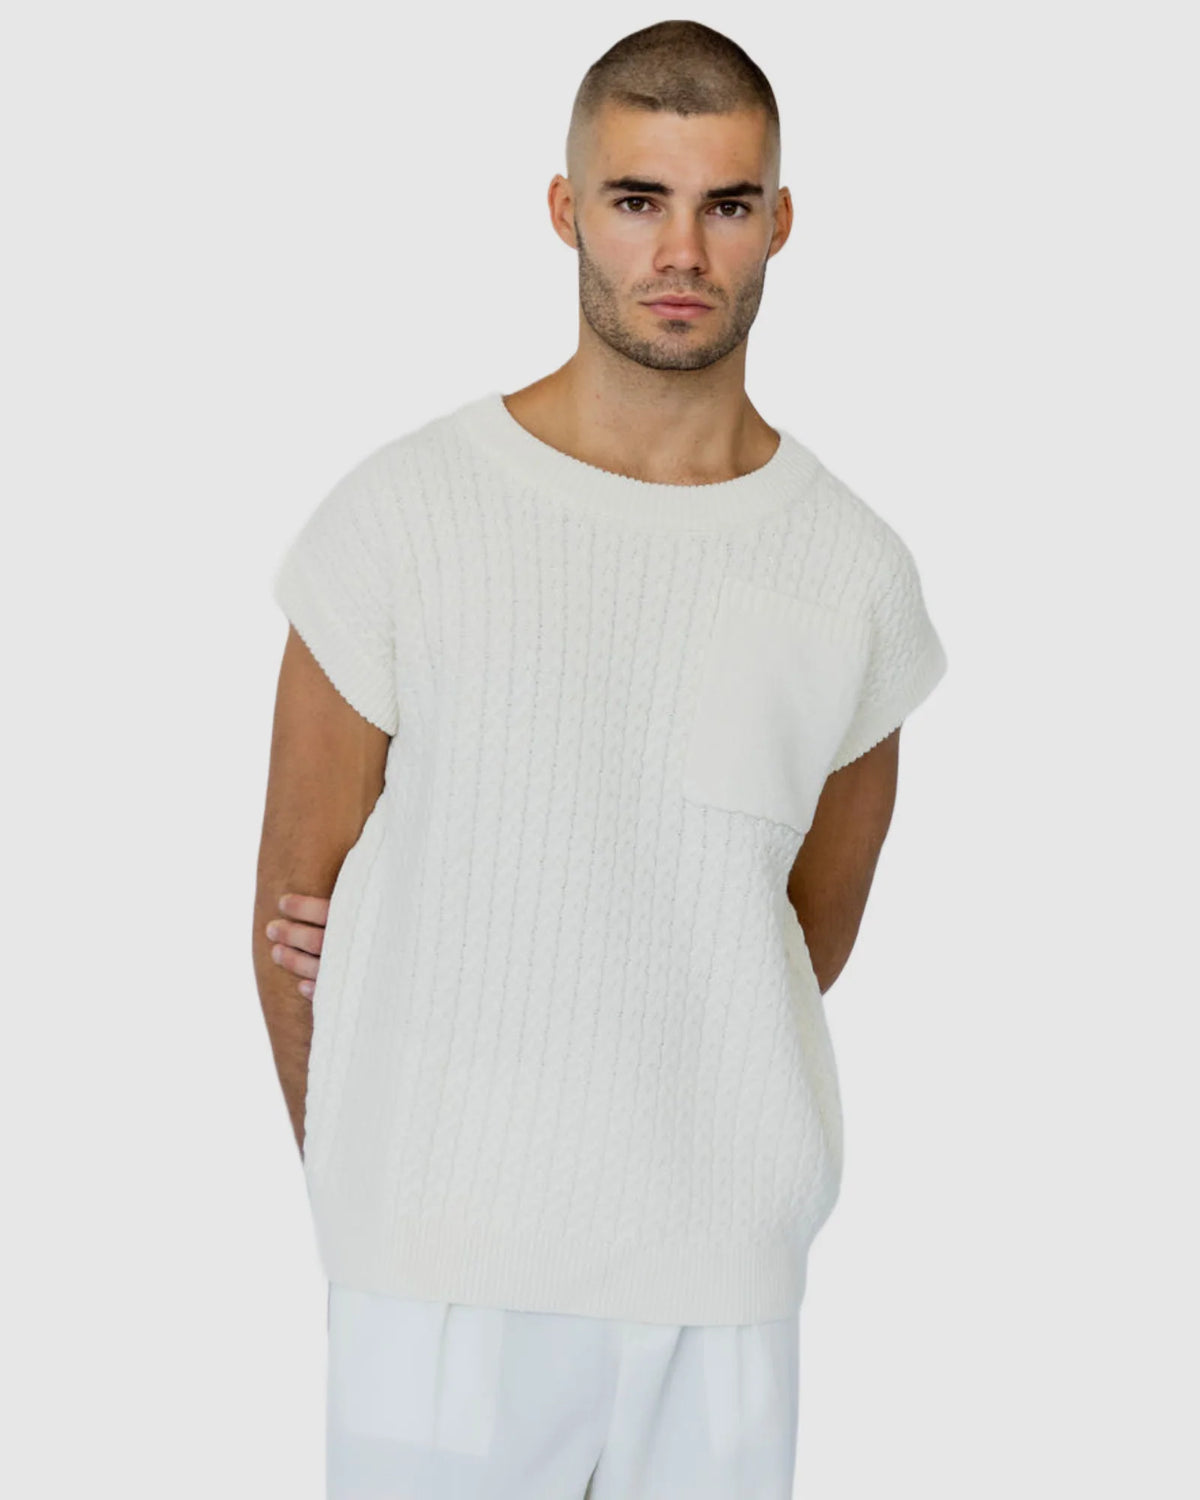 Justin Cassin Mateo Pocket Knitted Vest in White Color